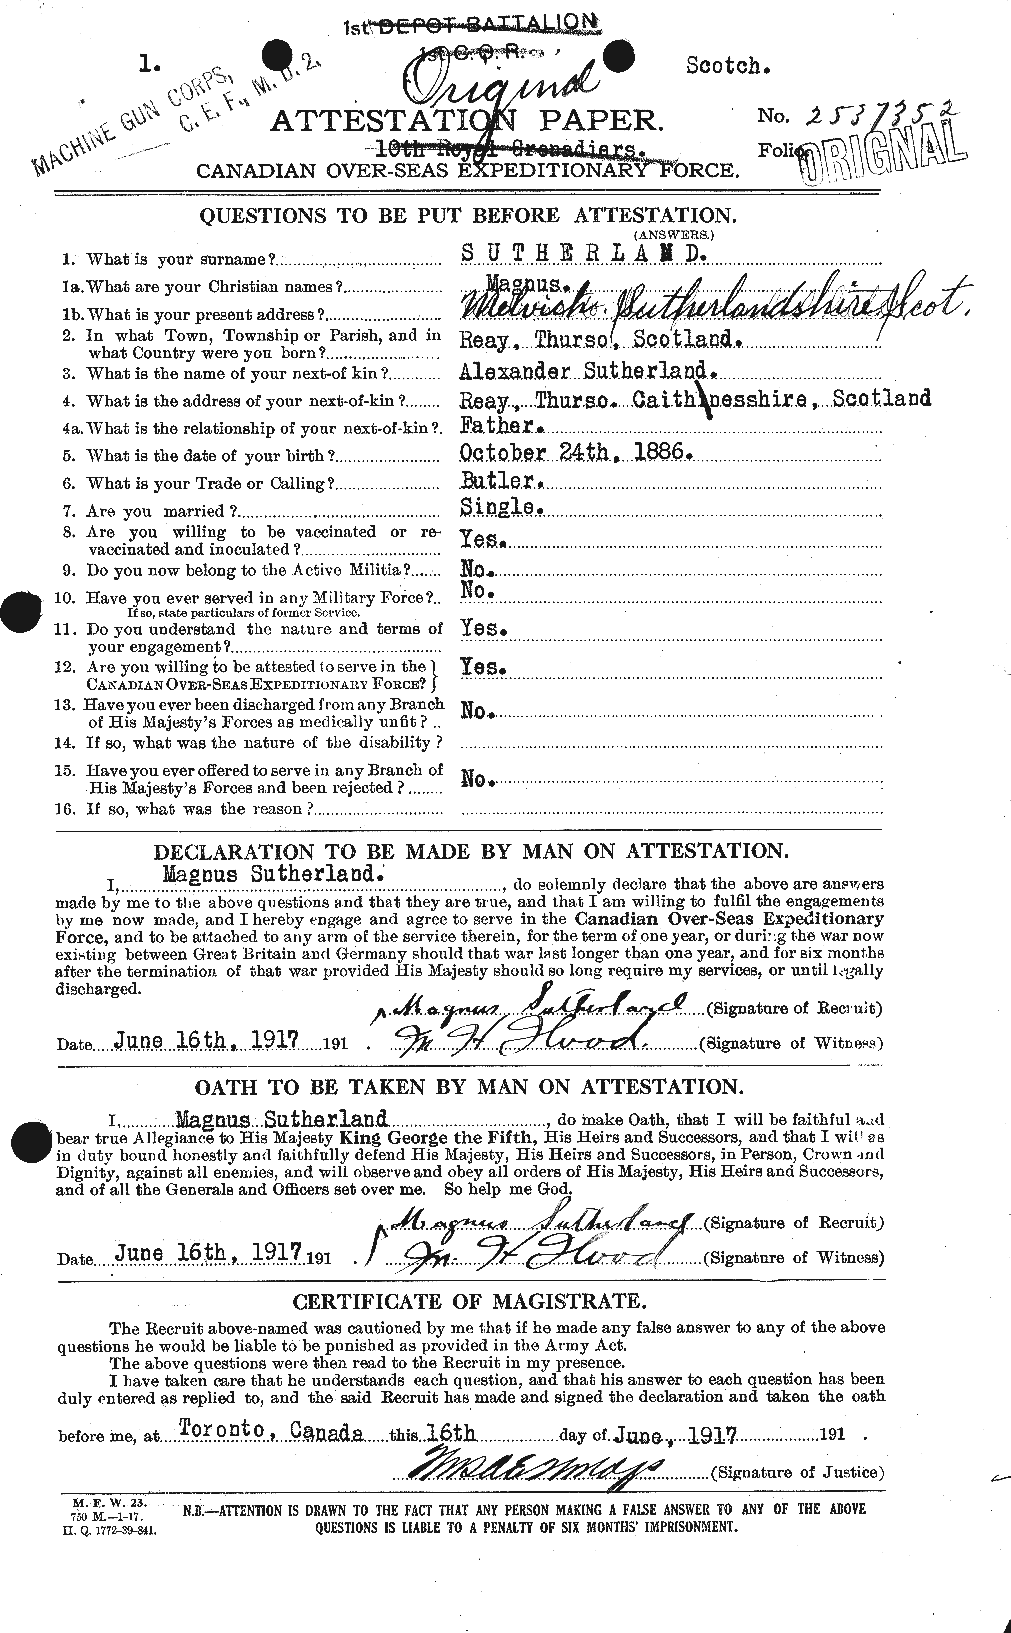 Personnel Records of the First World War - CEF 126846a